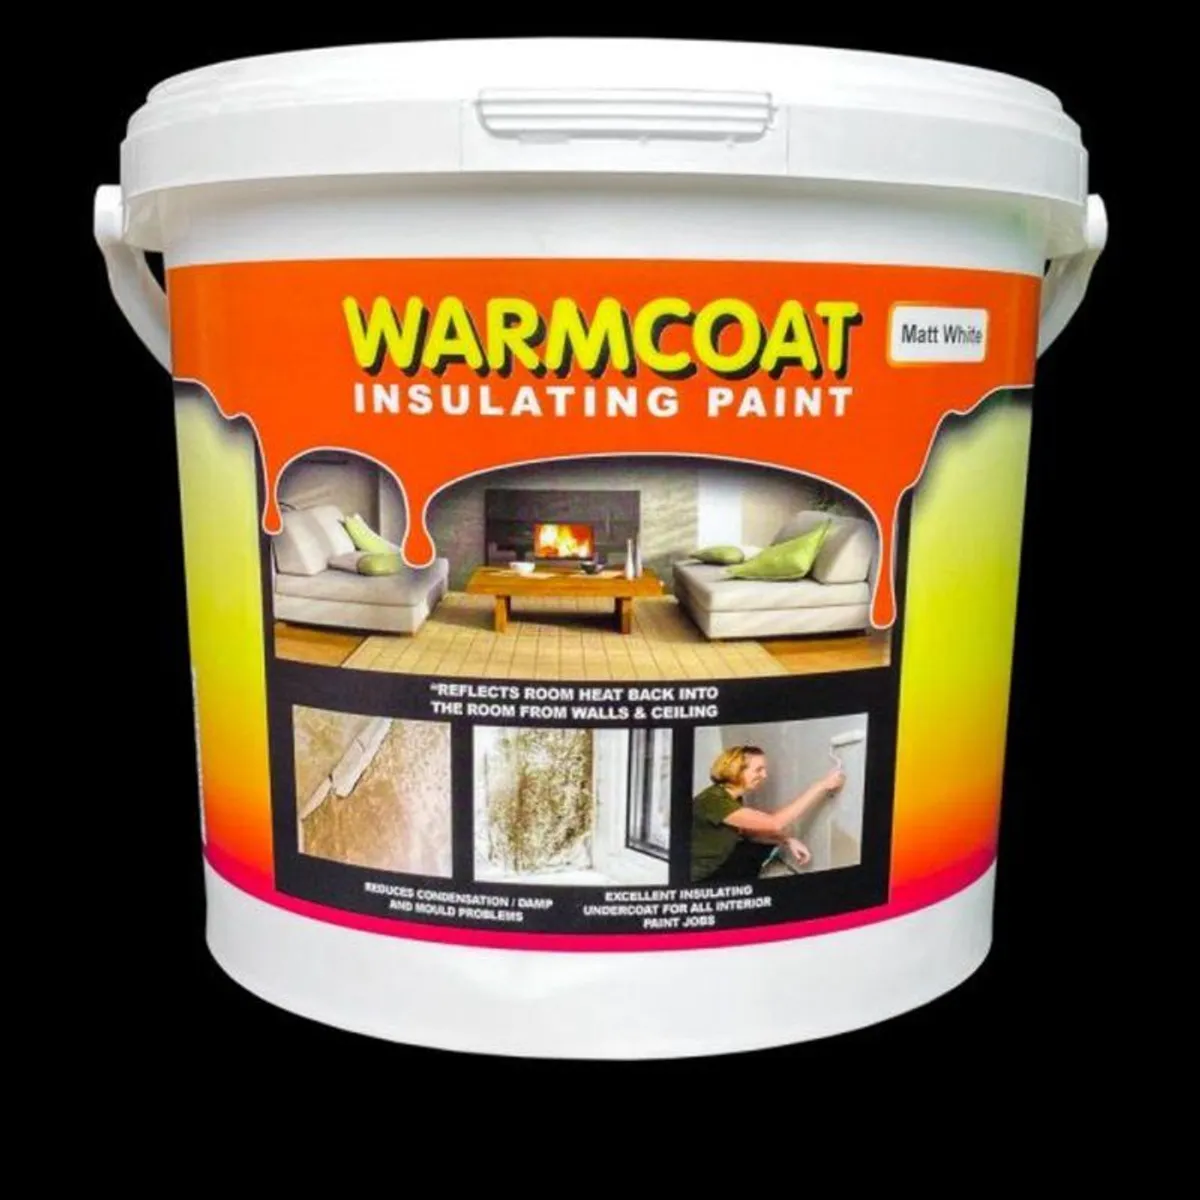 Warmcoat Insulating Paint!!!!